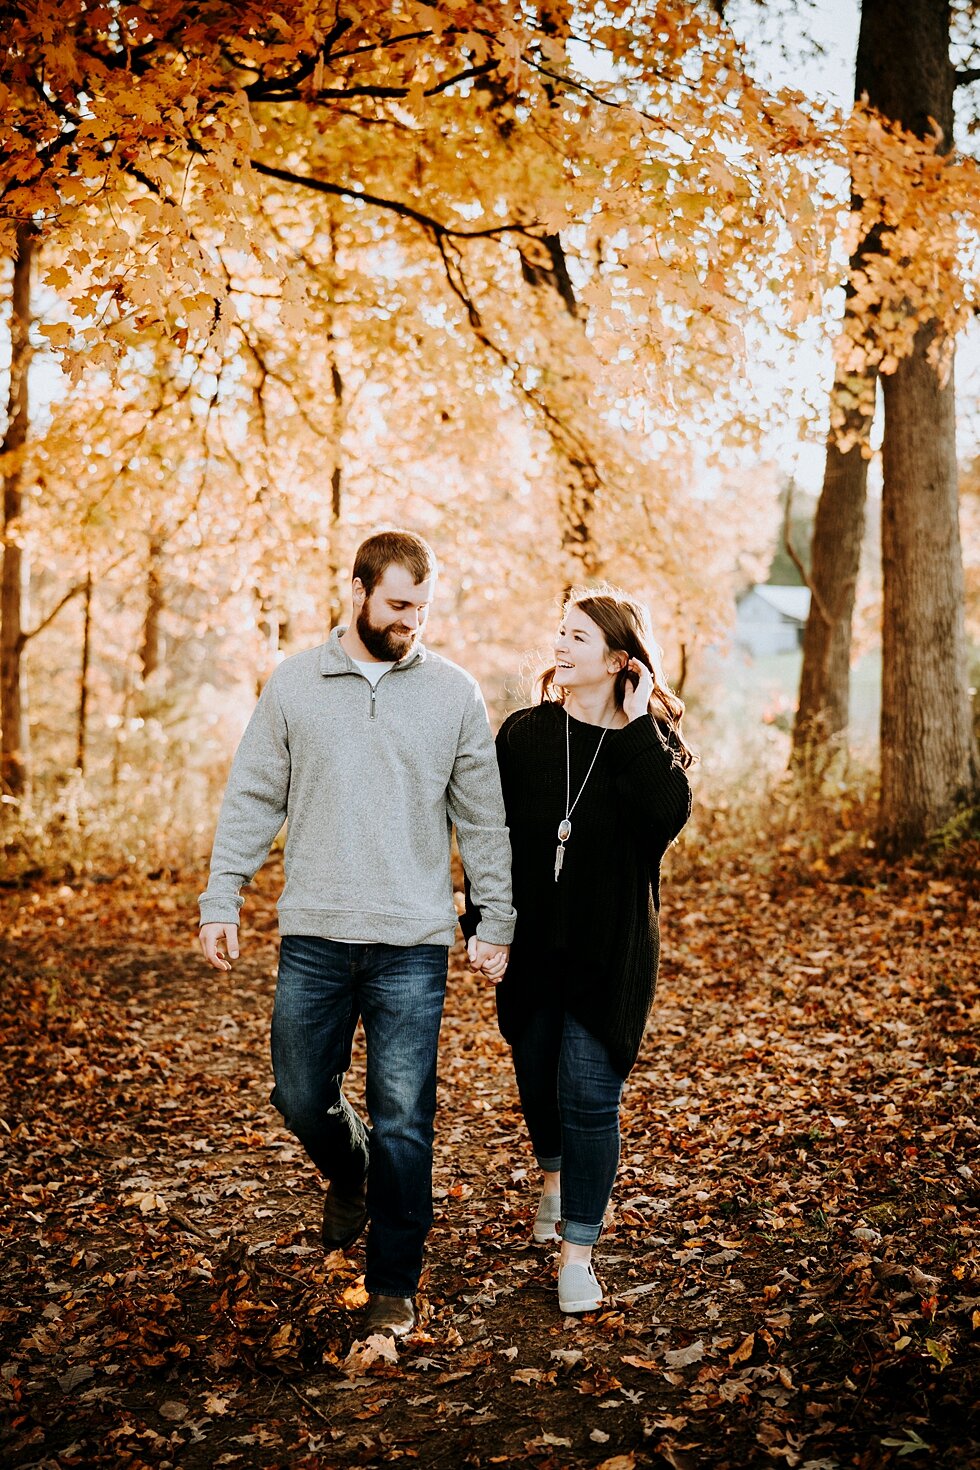  The lighting and fall leaves could not have made for a better setting for this engagement session! #engagementgoals #engagementphotographer #engaged #outdoorengagement #kentuckyphotographer #indianaphotographer #louisvillephotographer #engagementpho